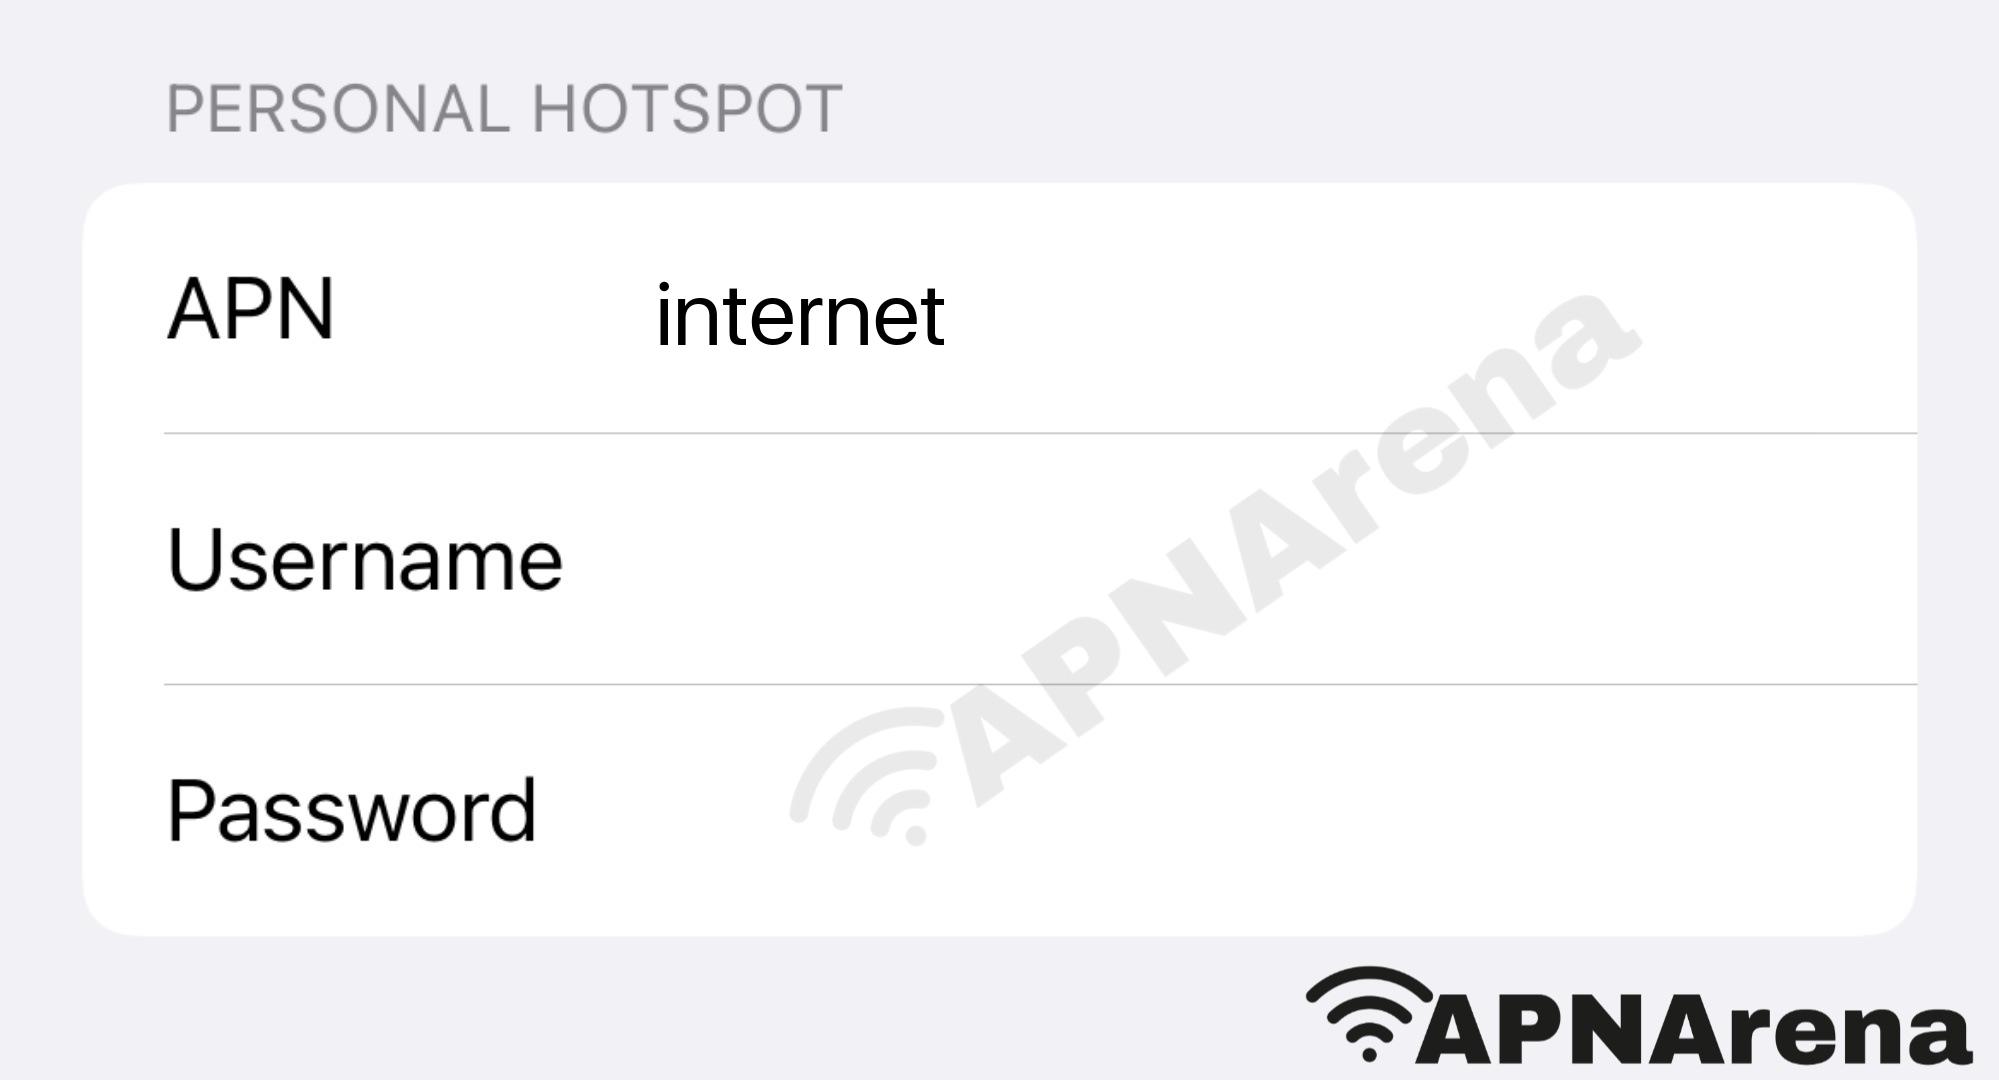 Chatr Personal Hotspot Settings for iPhone